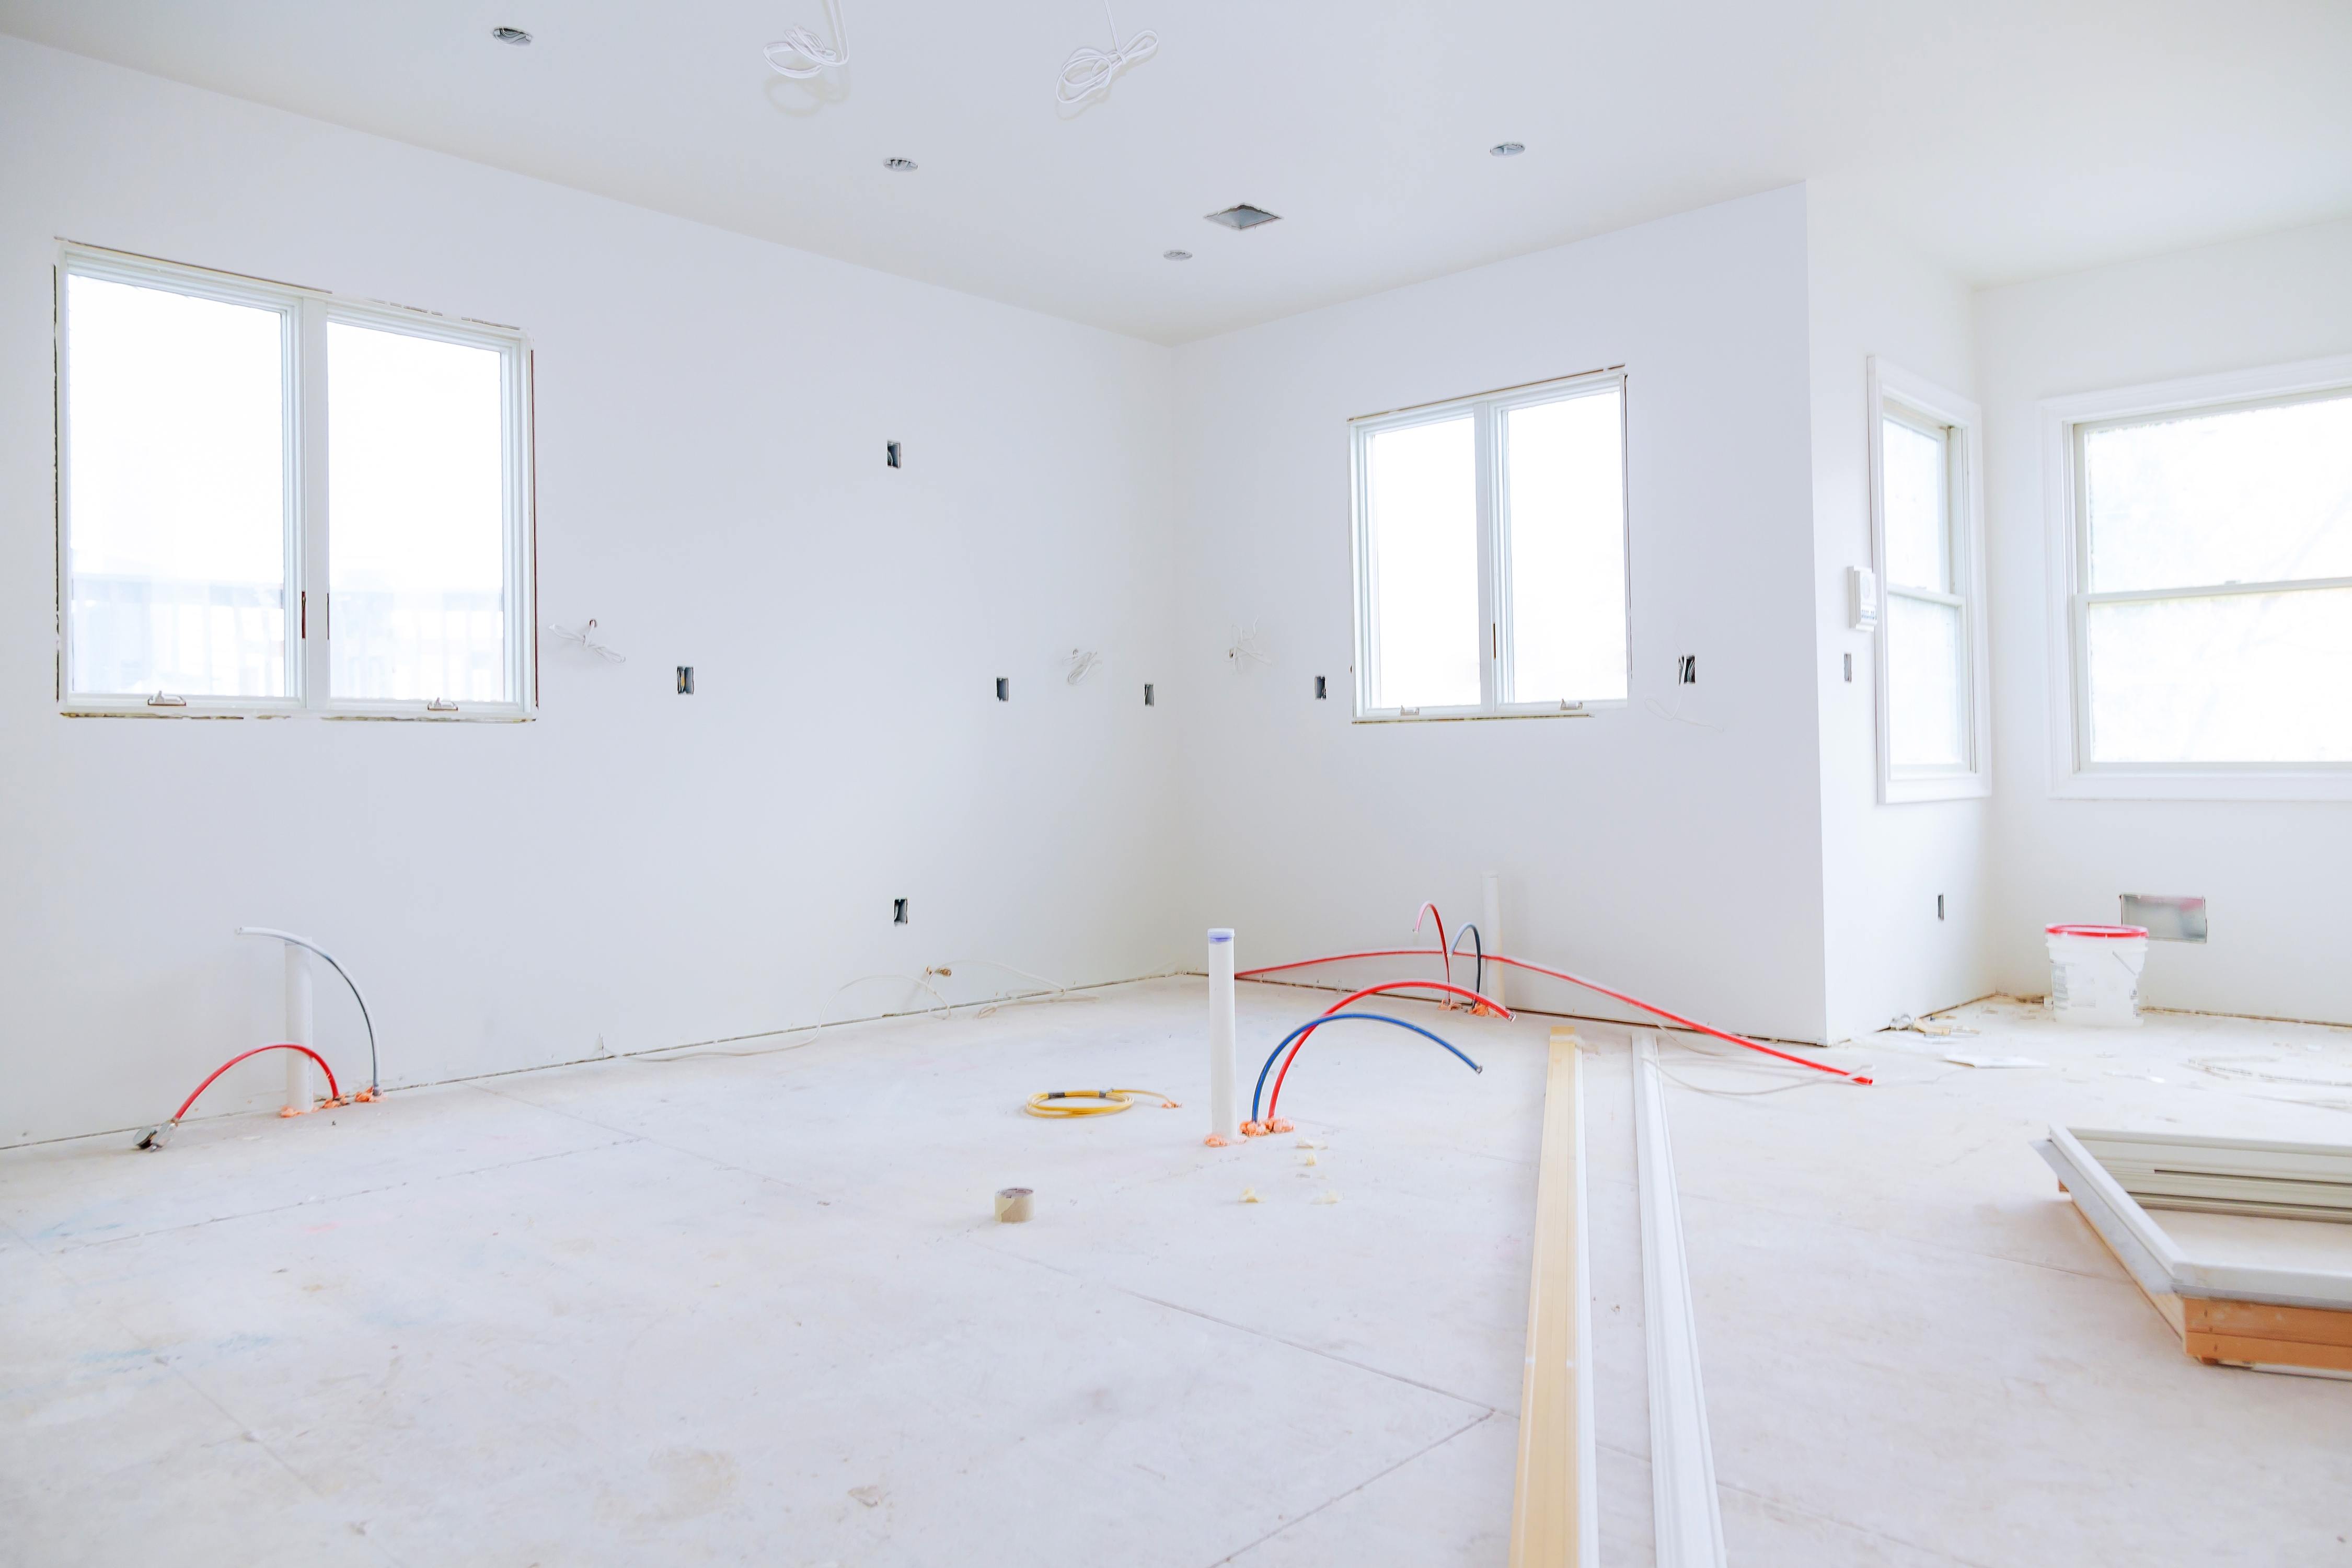 Interior construction of housing project with drywall installed and patched without building is a